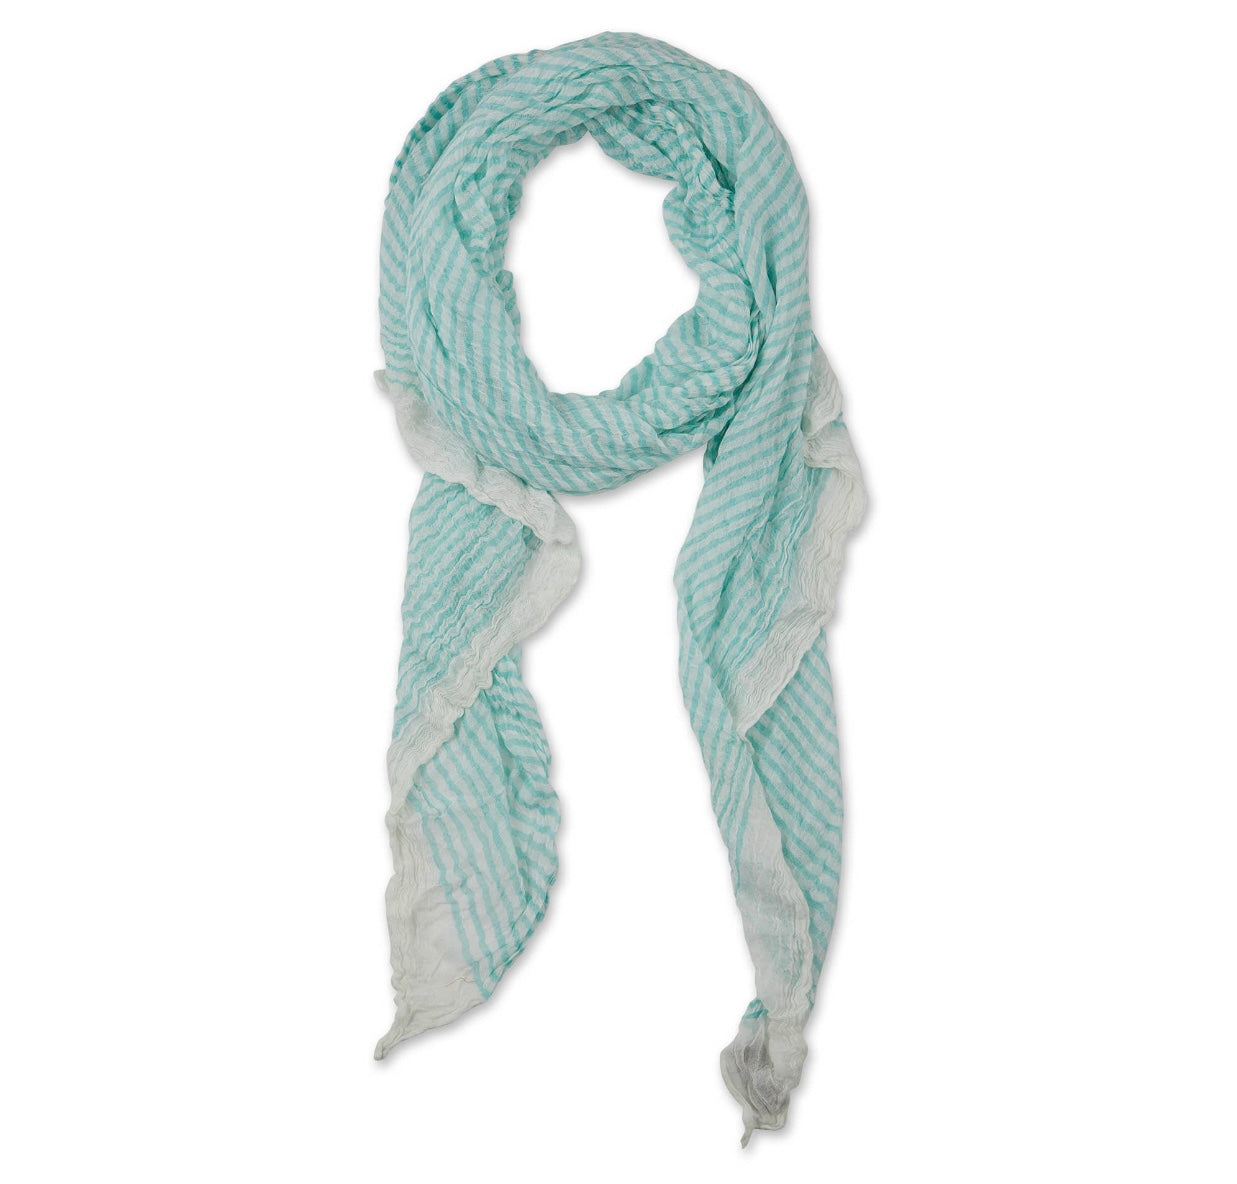 Belle Bug Scarf - Molly + Kate 